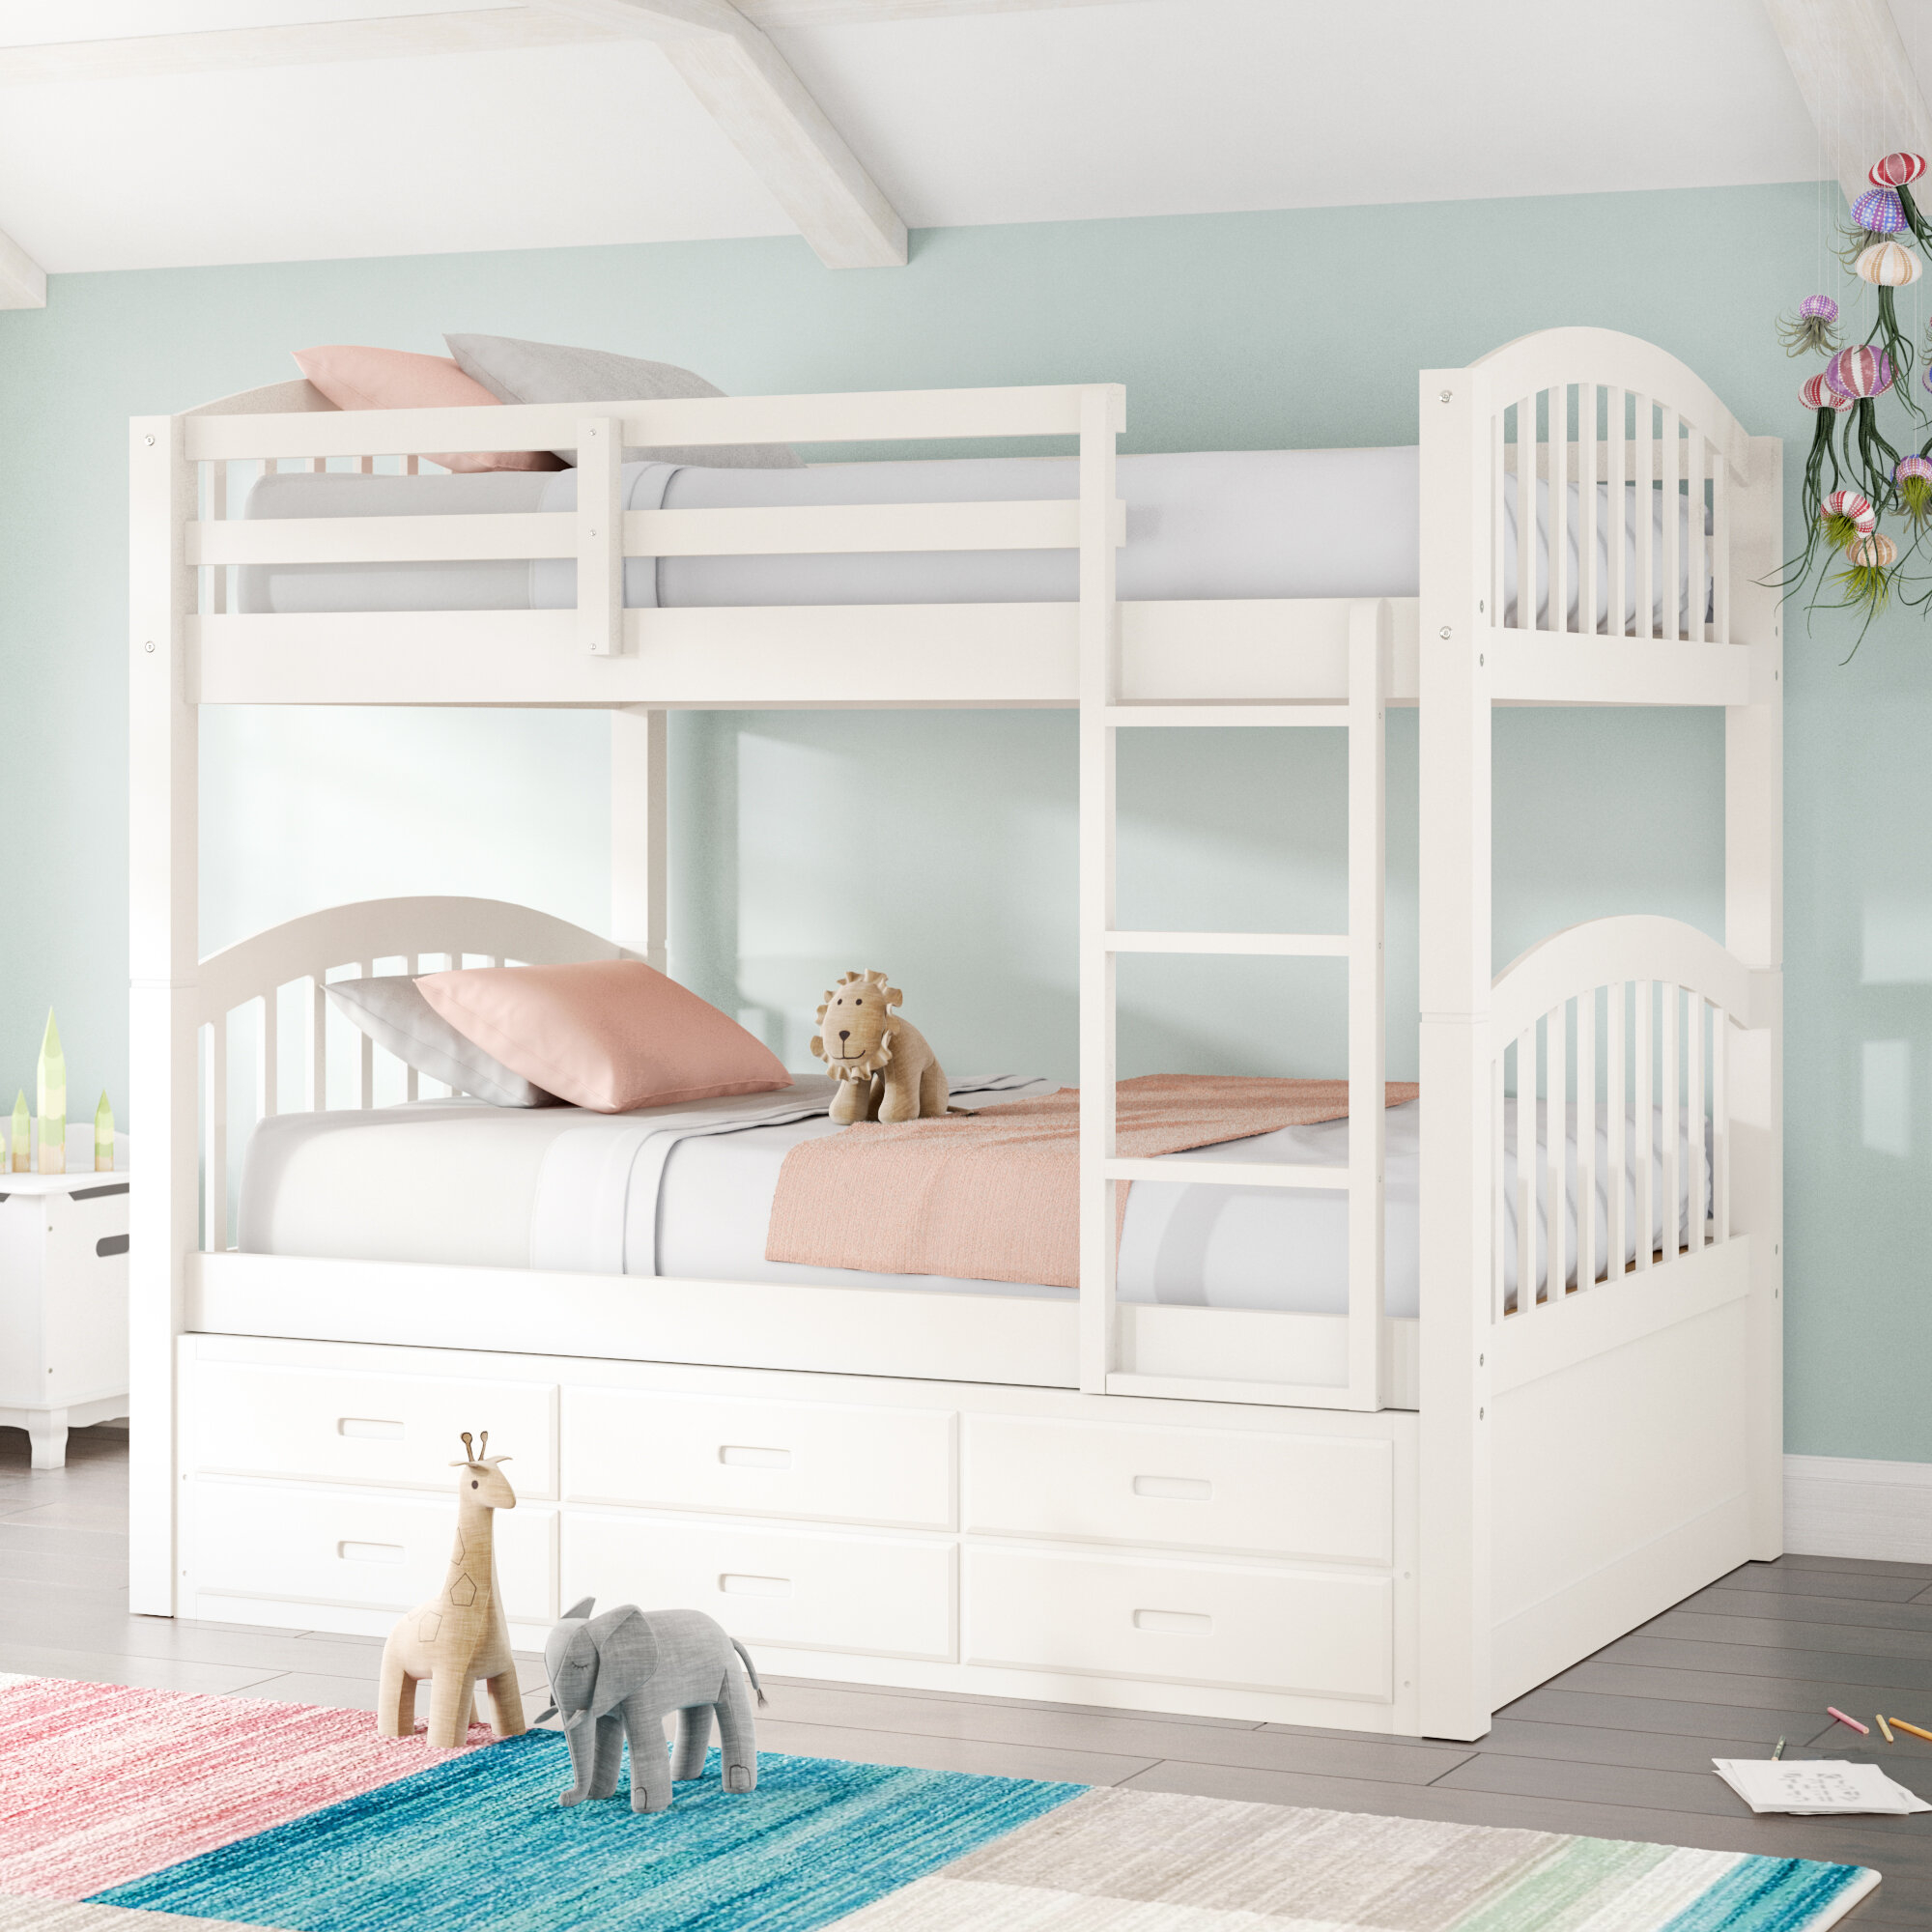 Bunk Beds With Dressers Visualhunt, Twin Over Twin Bunk Bed With Trundle And Drawers